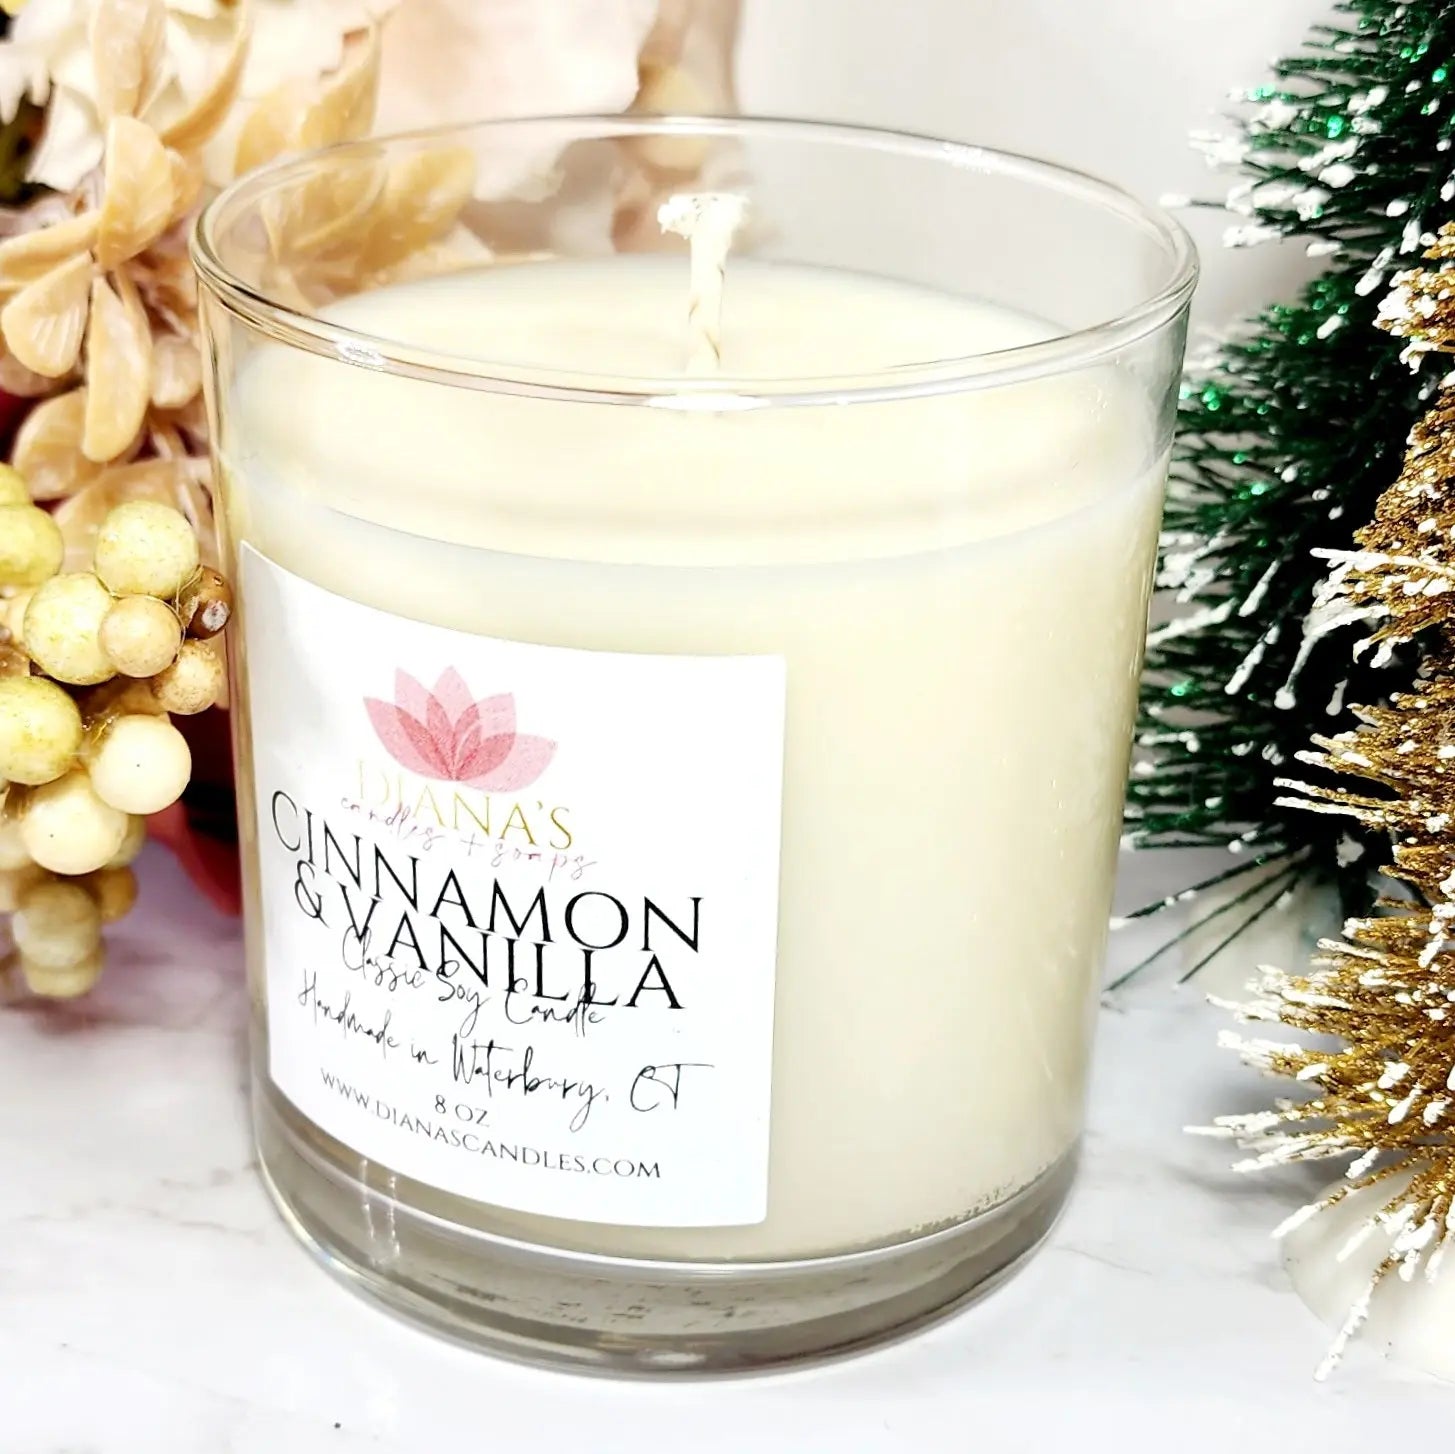 Cinnamon and Vanilla Candle - Diana's Candles and Soaps 